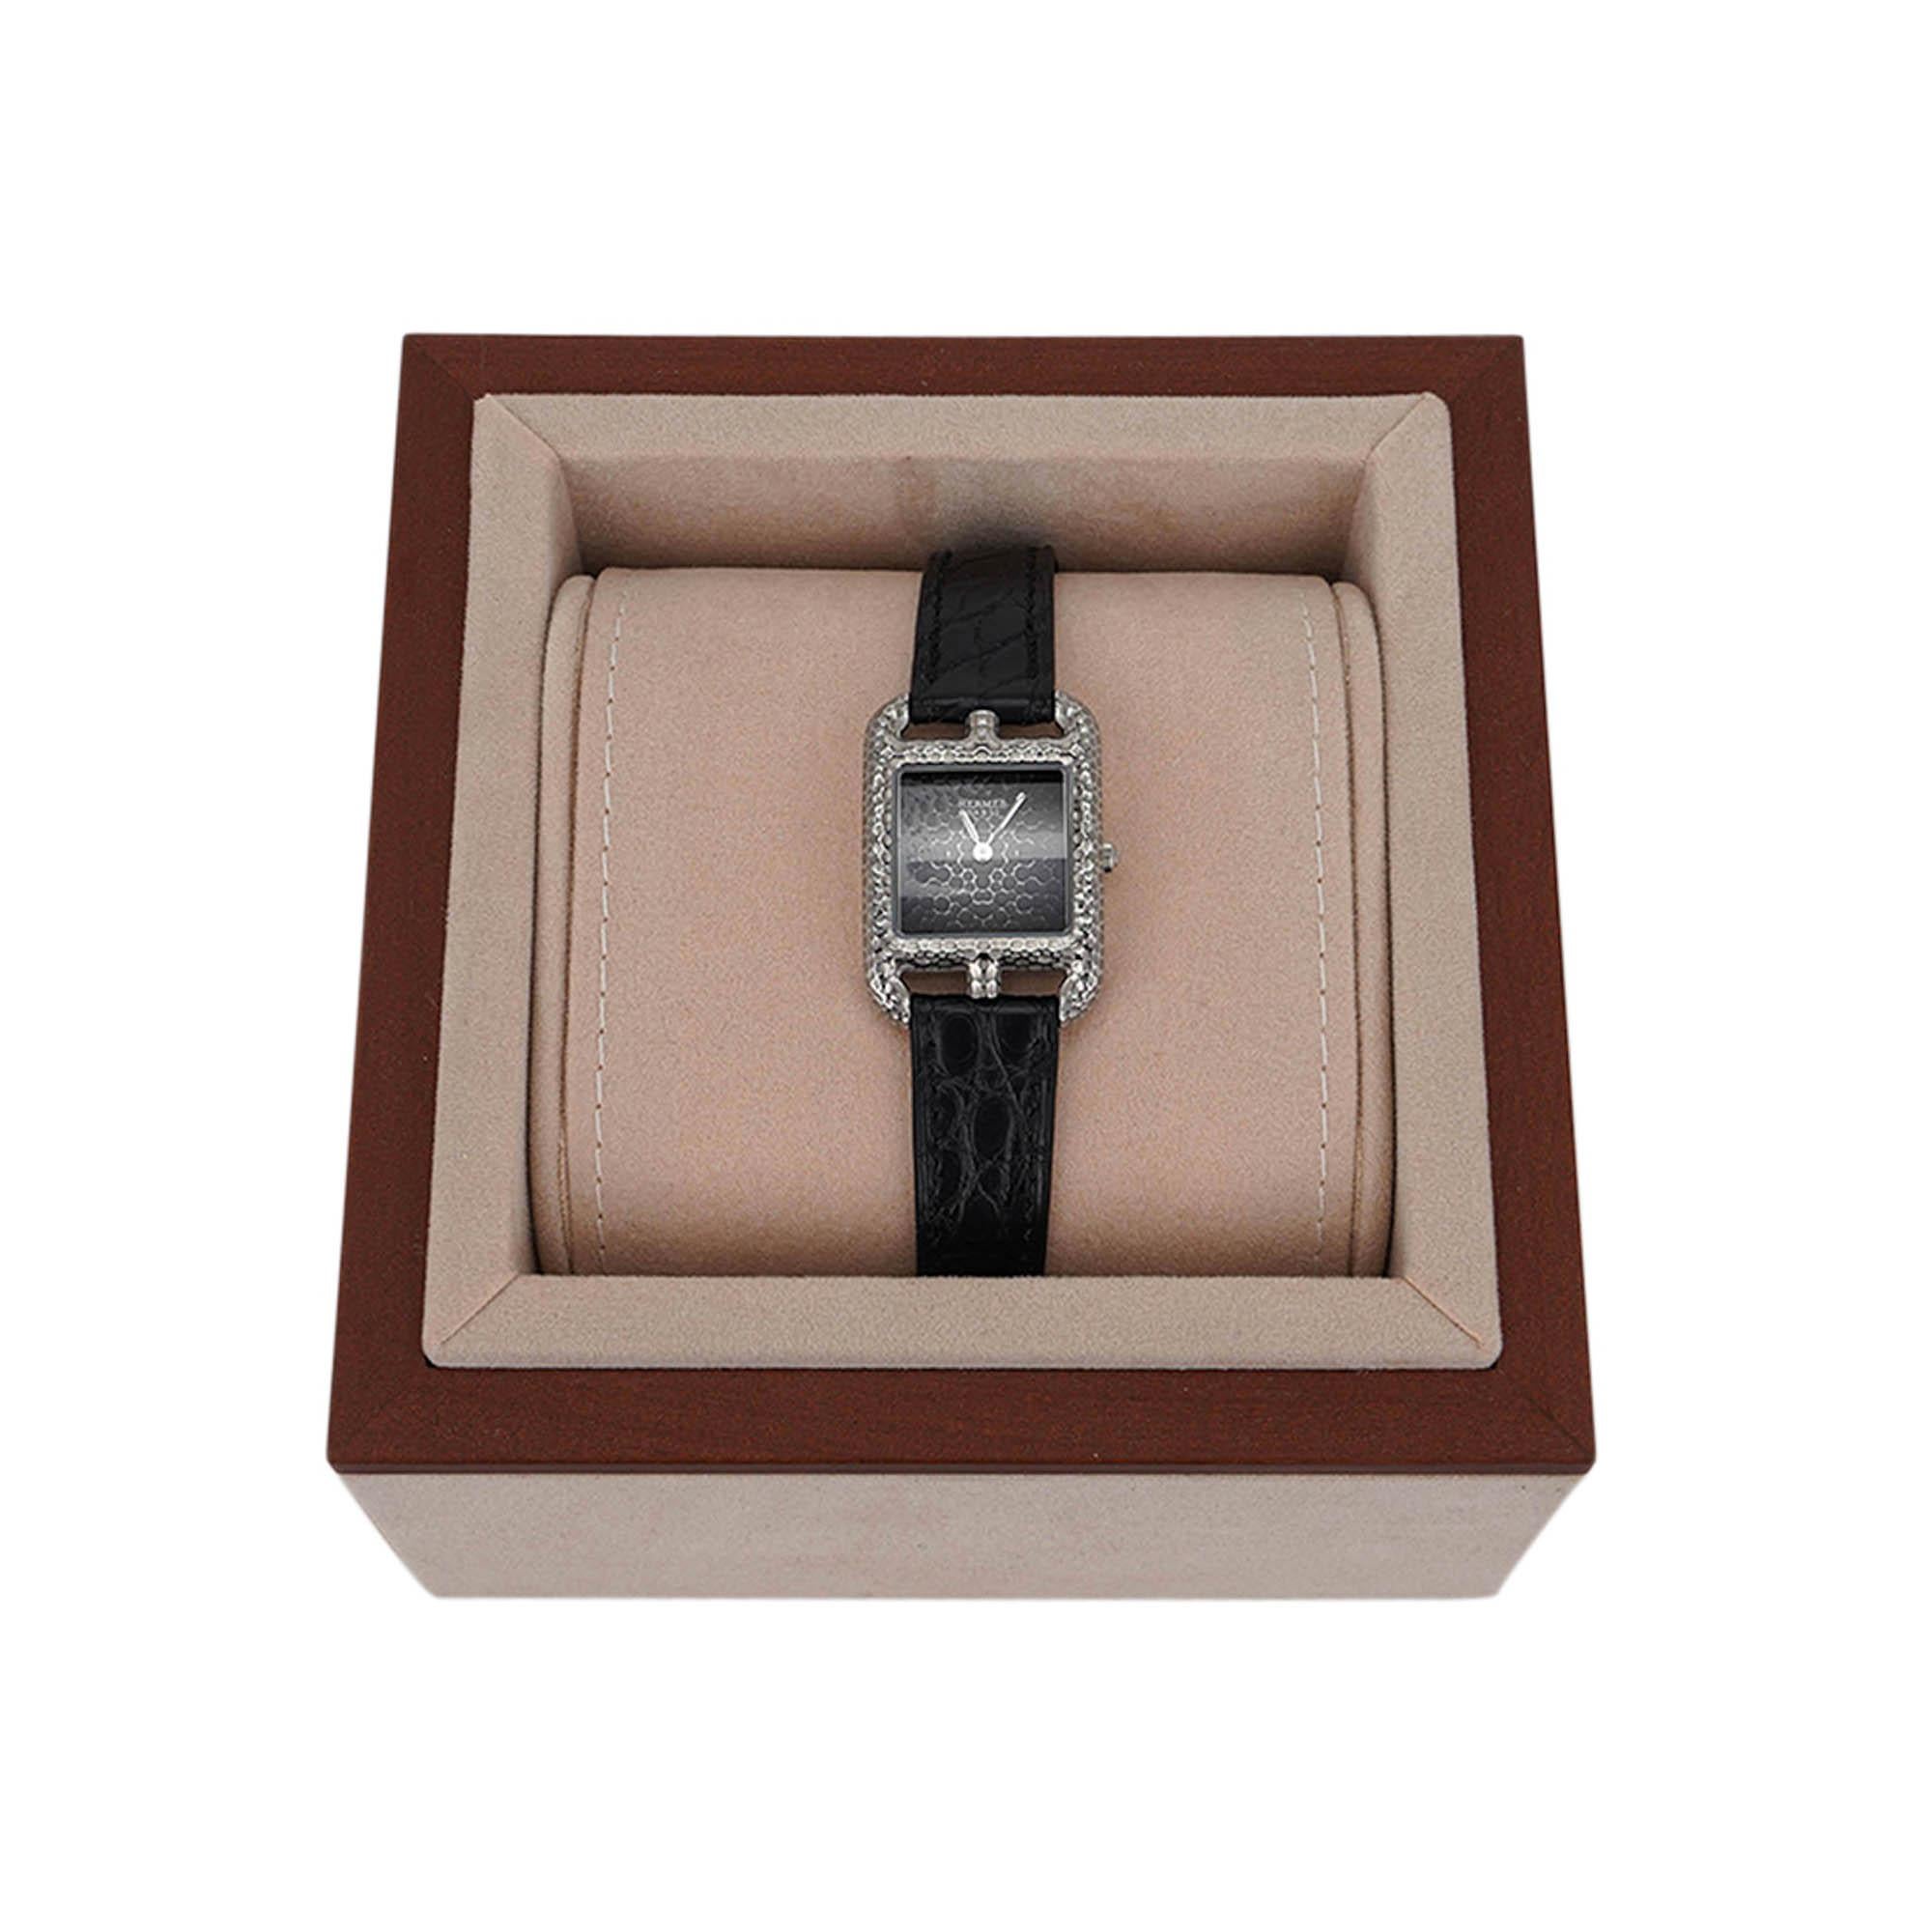 Women's Hermes Cape Cod Hammered Stainless Steel Limited Edtion  Watch For Sale